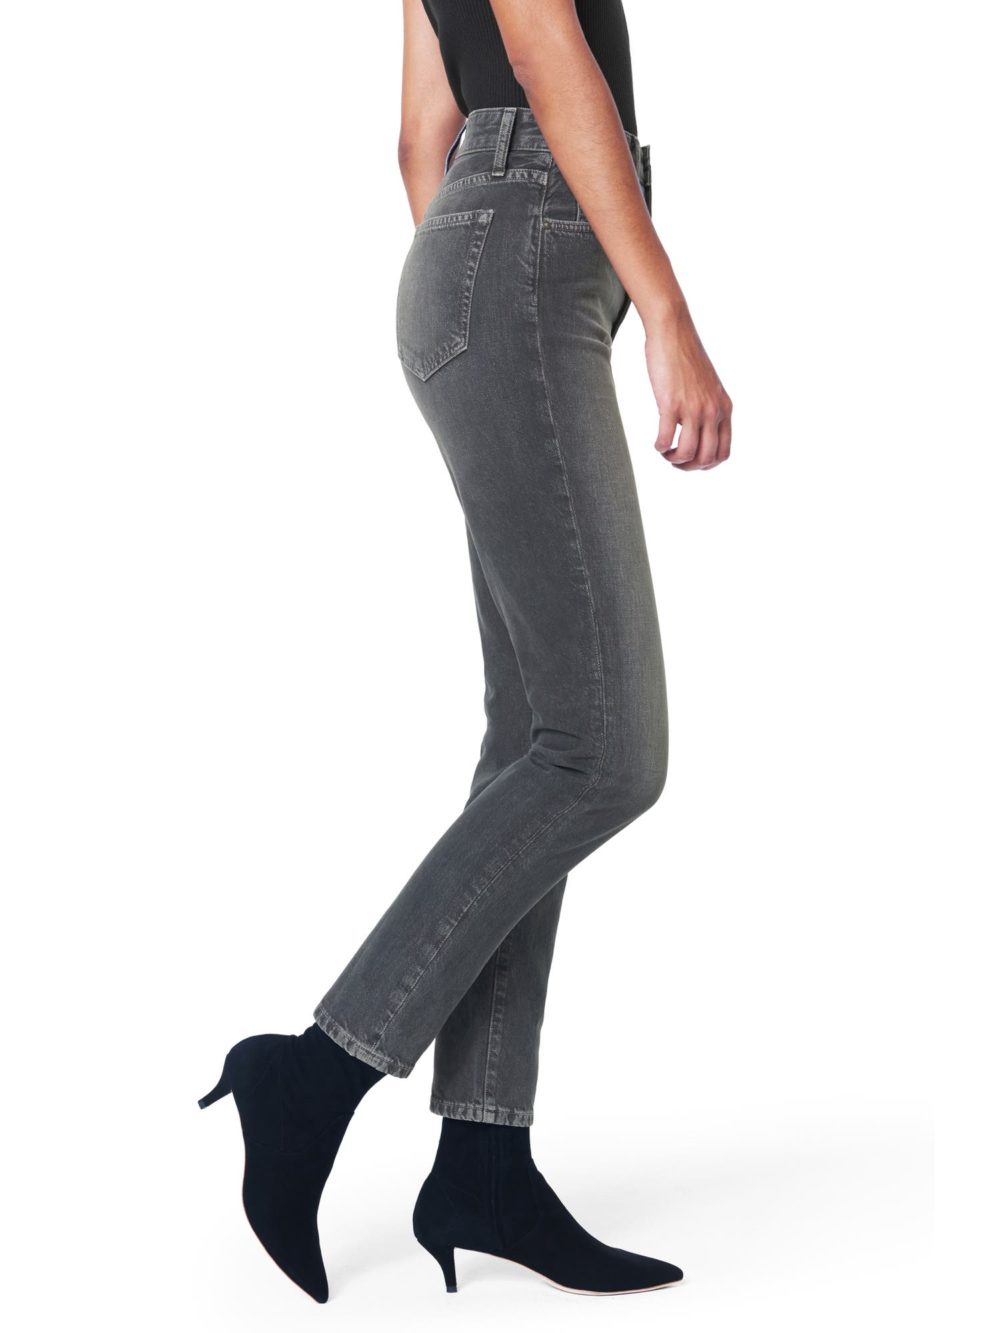 woocommerce-673321-2209615.cloudwaysapps.com-joes-jeans-x-weworewhat-womens-grey-the-danielle-high-rise-vintage-straight-jeans